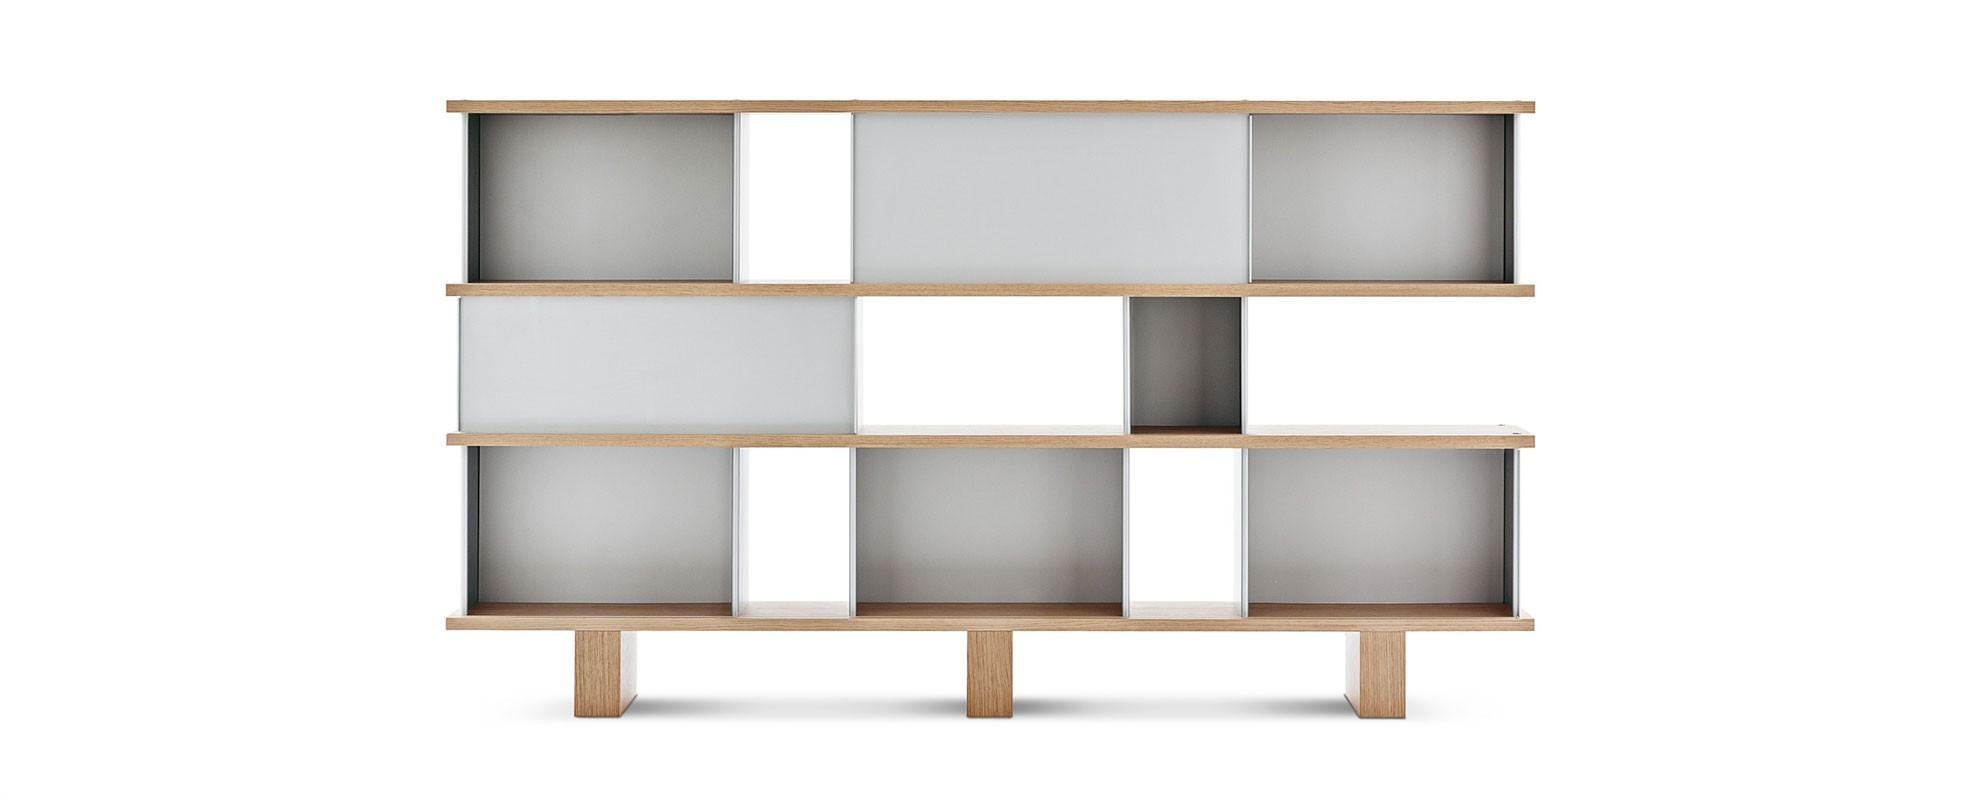 Contemporary Charlotte Perriand Nuage Shelving Unit, Wood and Aluminium by Cassina For Sale